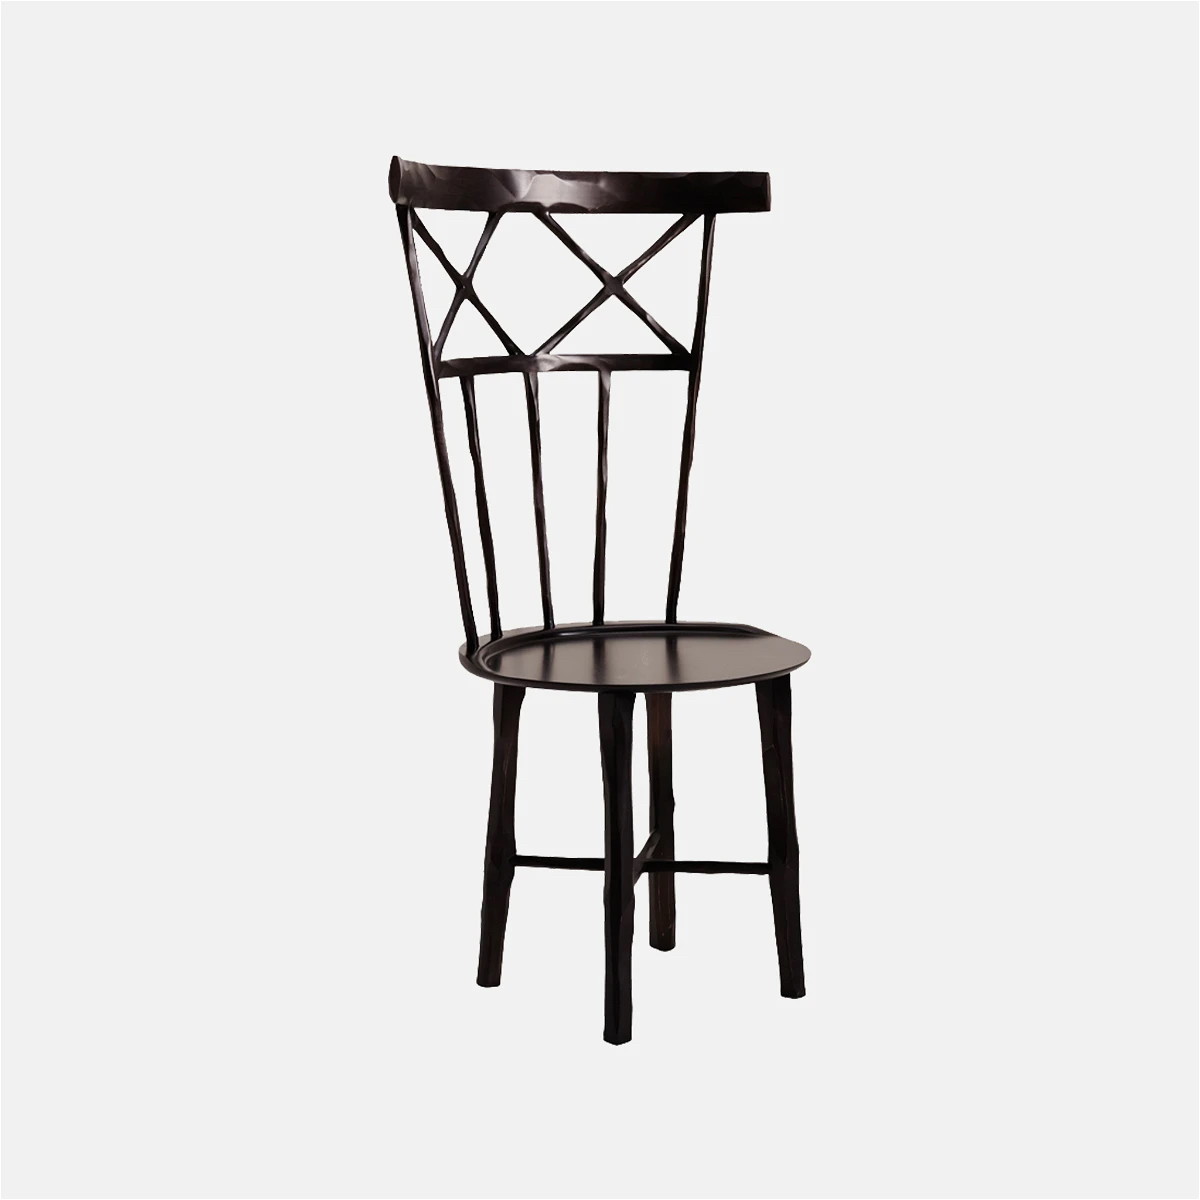 a black chair with a wooden seat and back